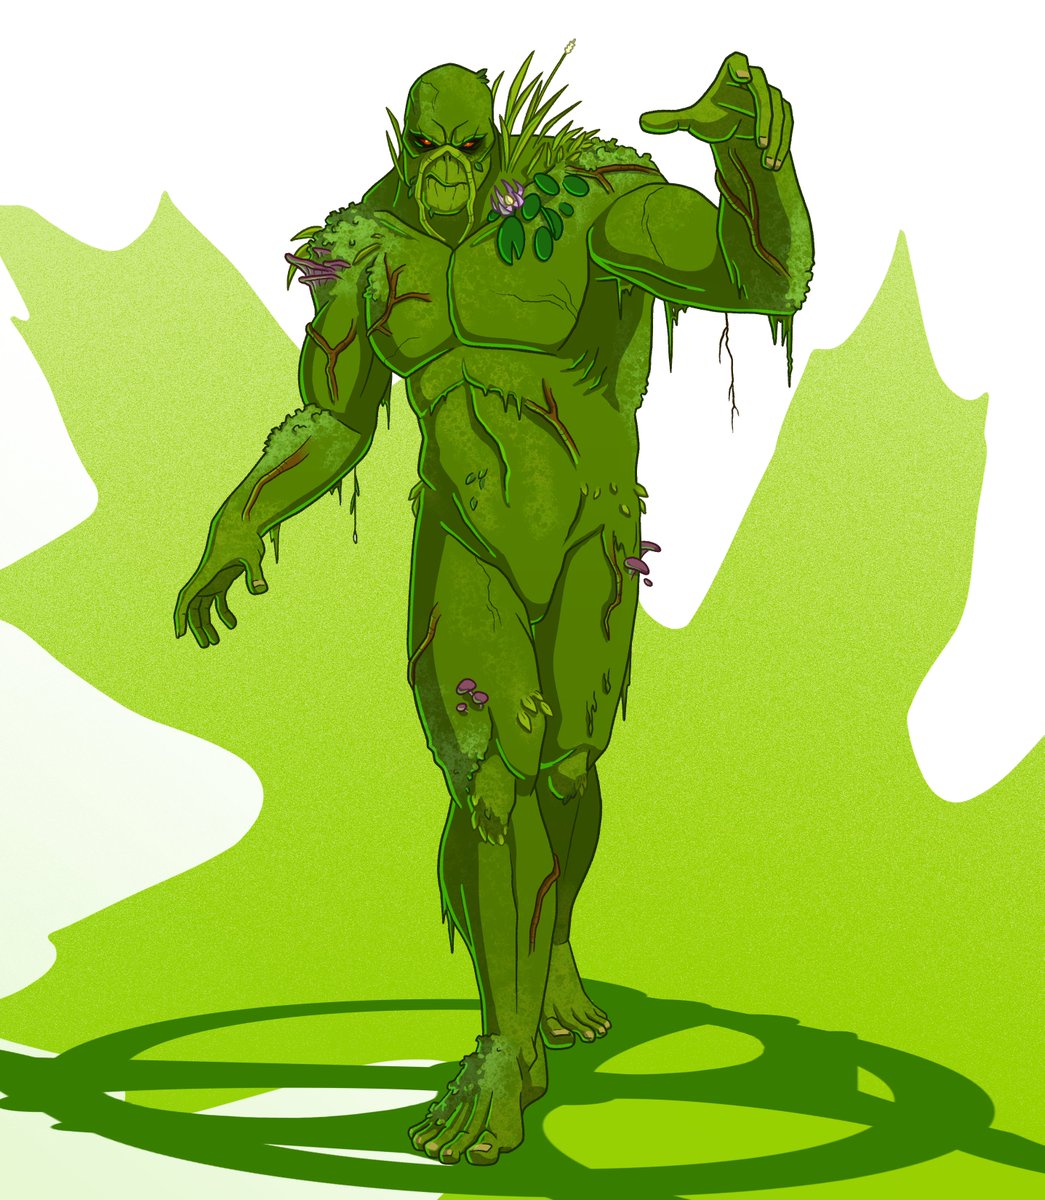 #DCember Day 2: Monster

Swamp Thing

#swampthing #dccomics #dcheroes